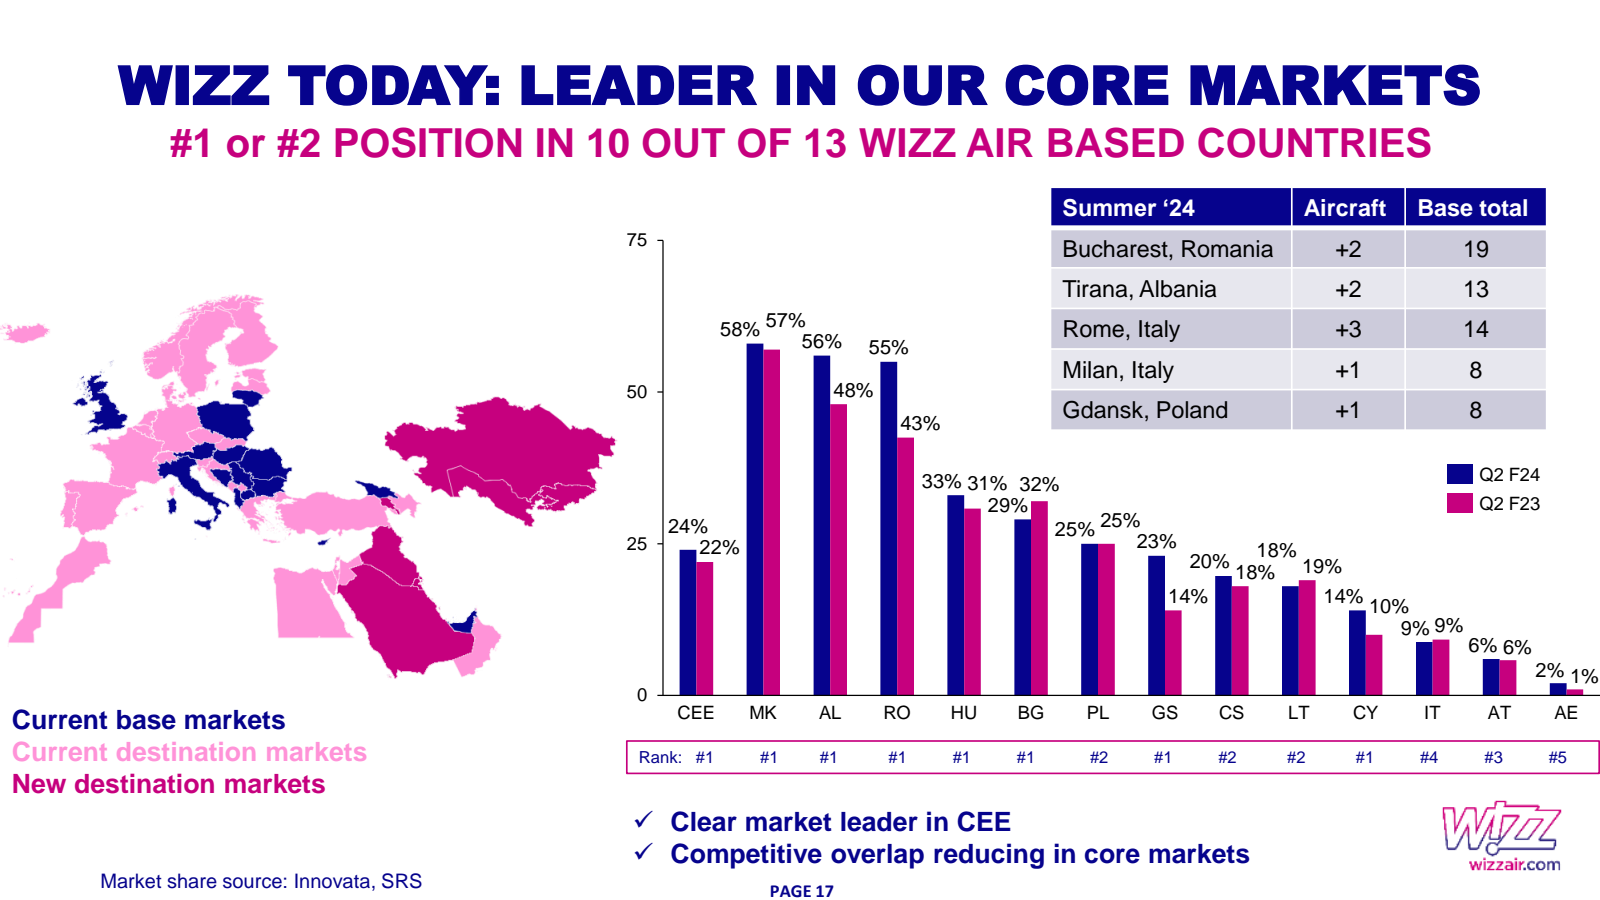 WIZZ TODAY : LEADER 